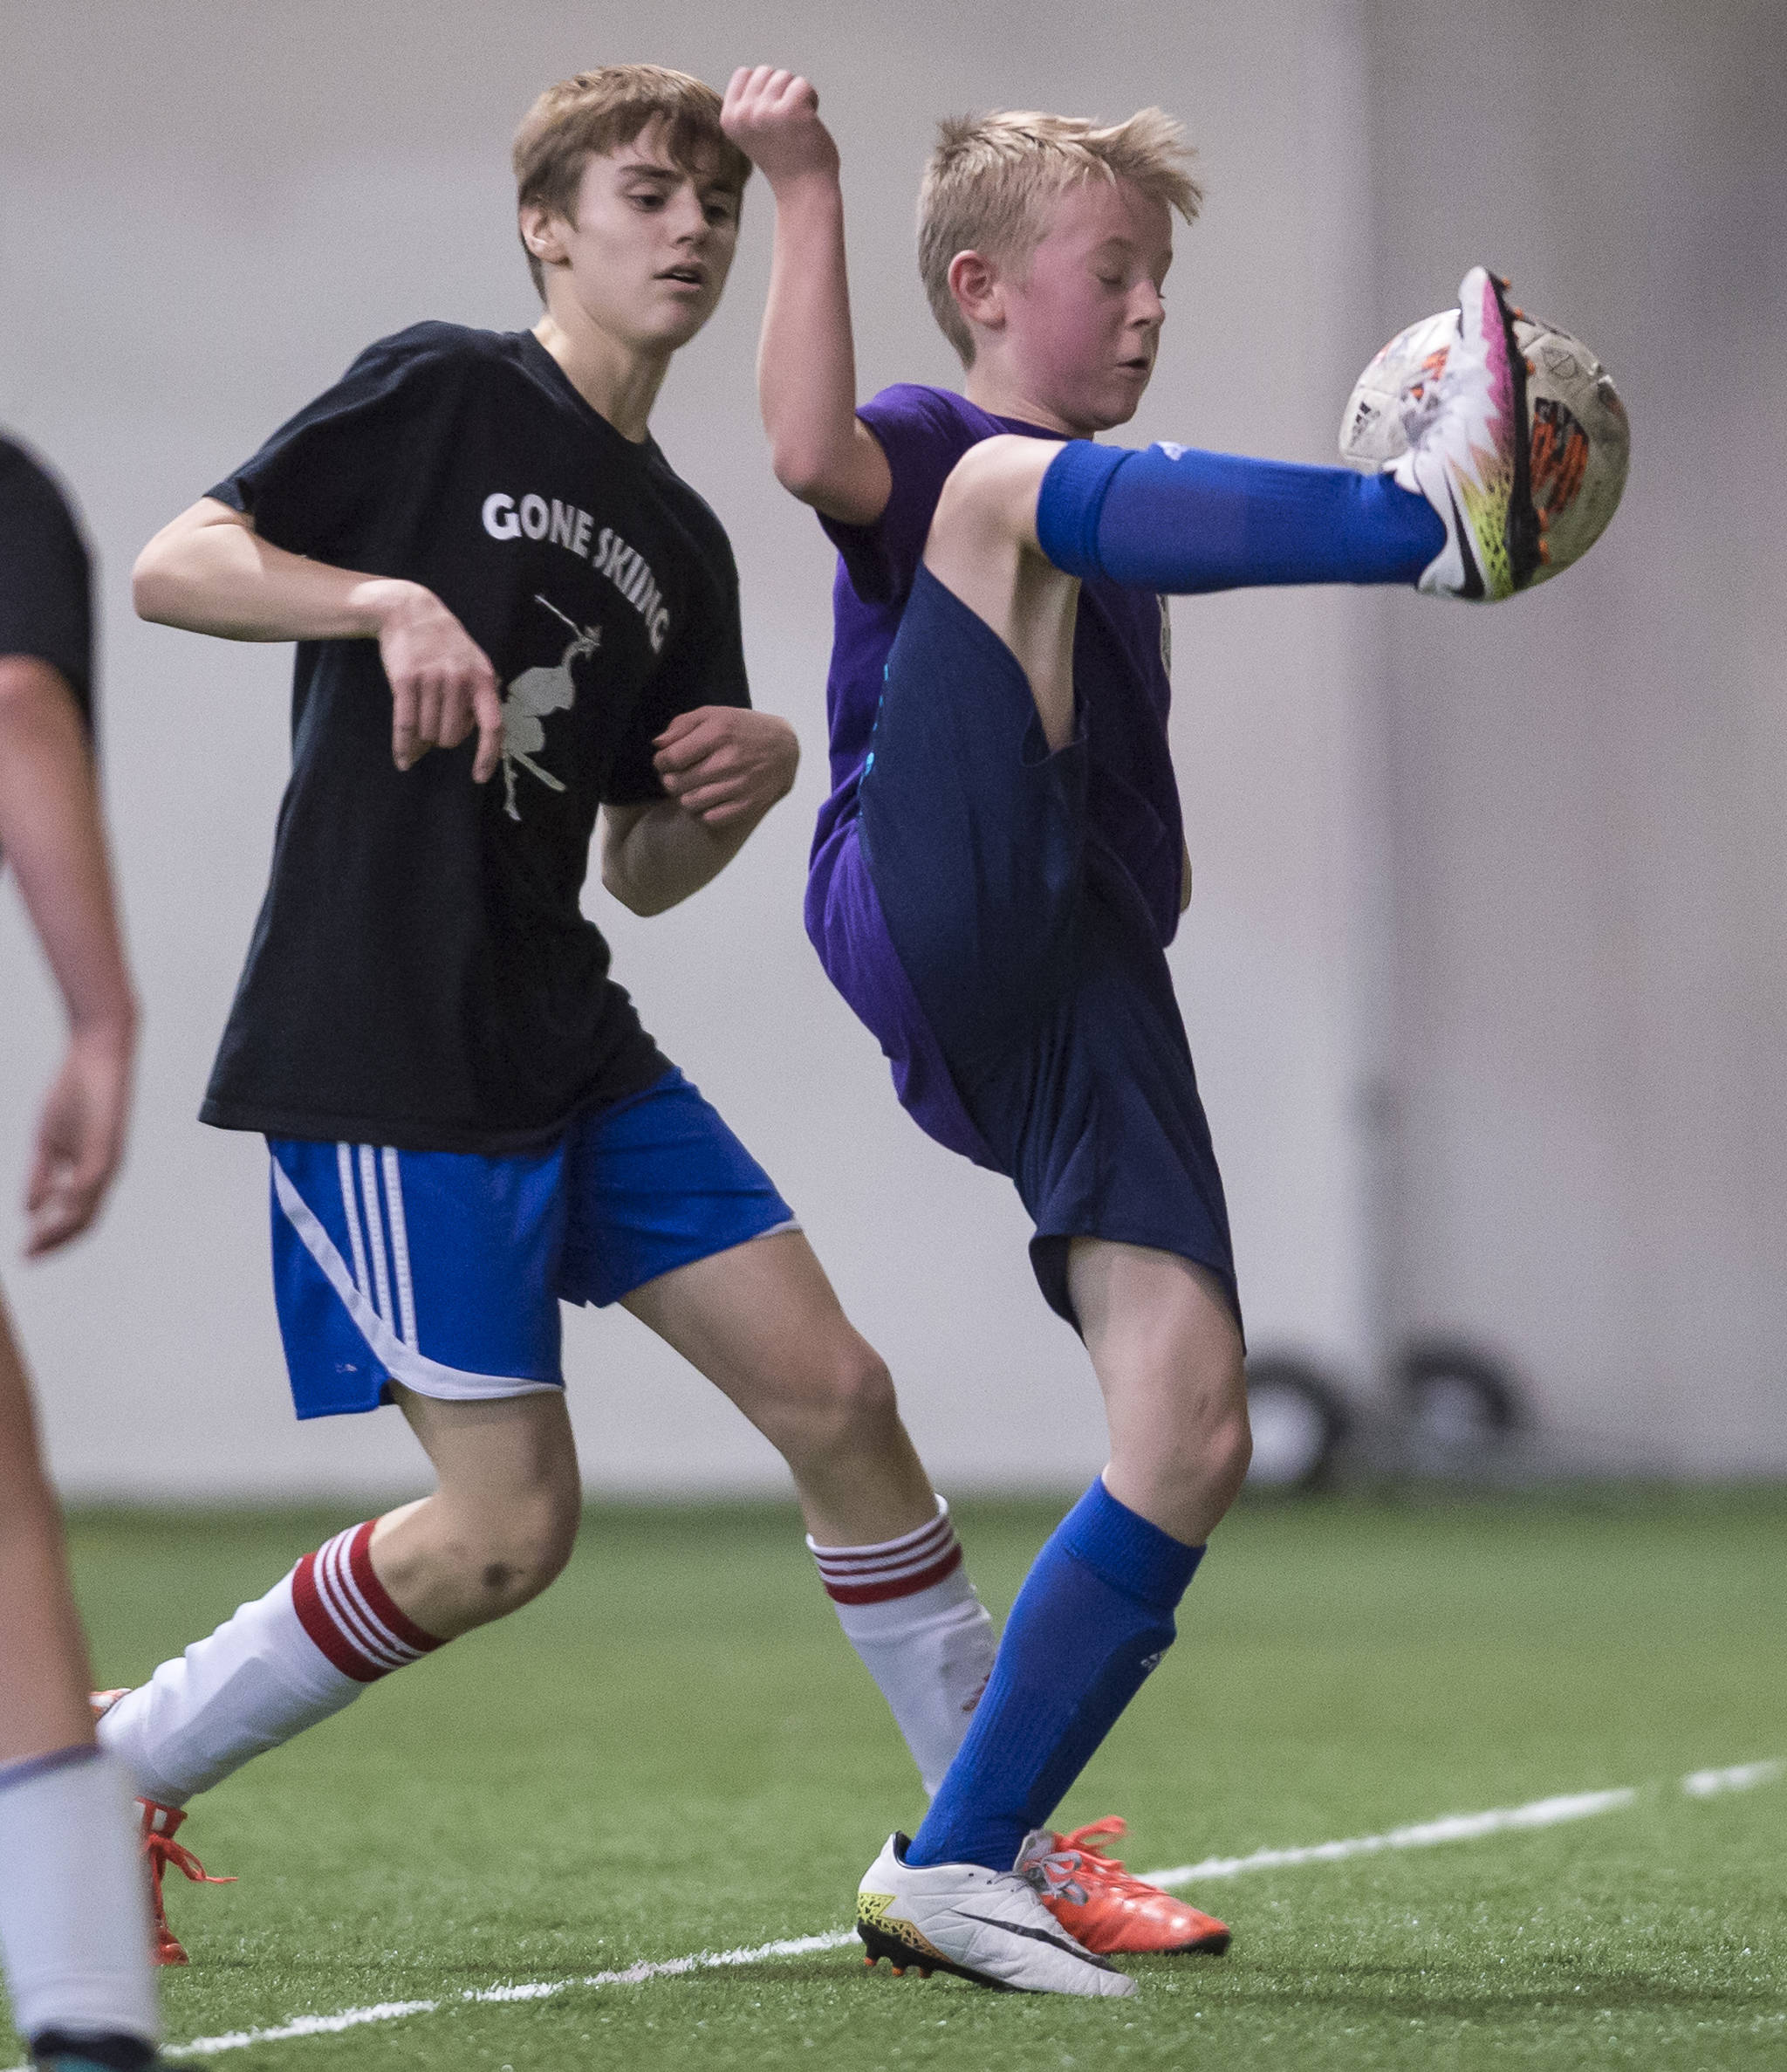 Grumpsicles play against Gone Skiing at the annual Holiday Cup Soccer Tournament at the Wells Fargo Dimond Park Field House on Wednesday, Dec. 26, 2018. (Michael Penn | Juneau Empire)